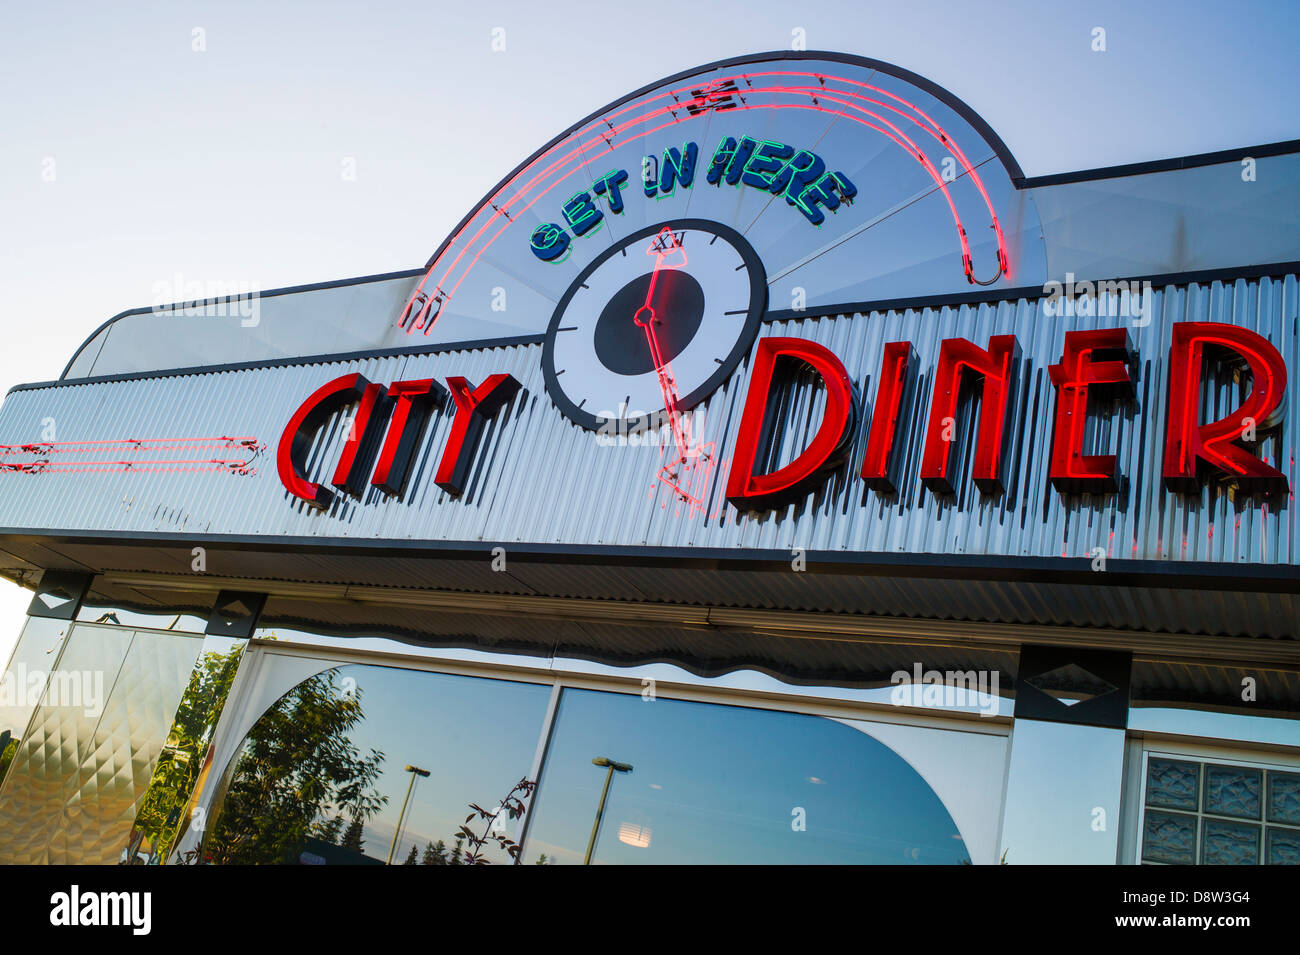 Exterior view of retro design stainless steel City Diner, Anchorage, Alaska, USA Stock Photo